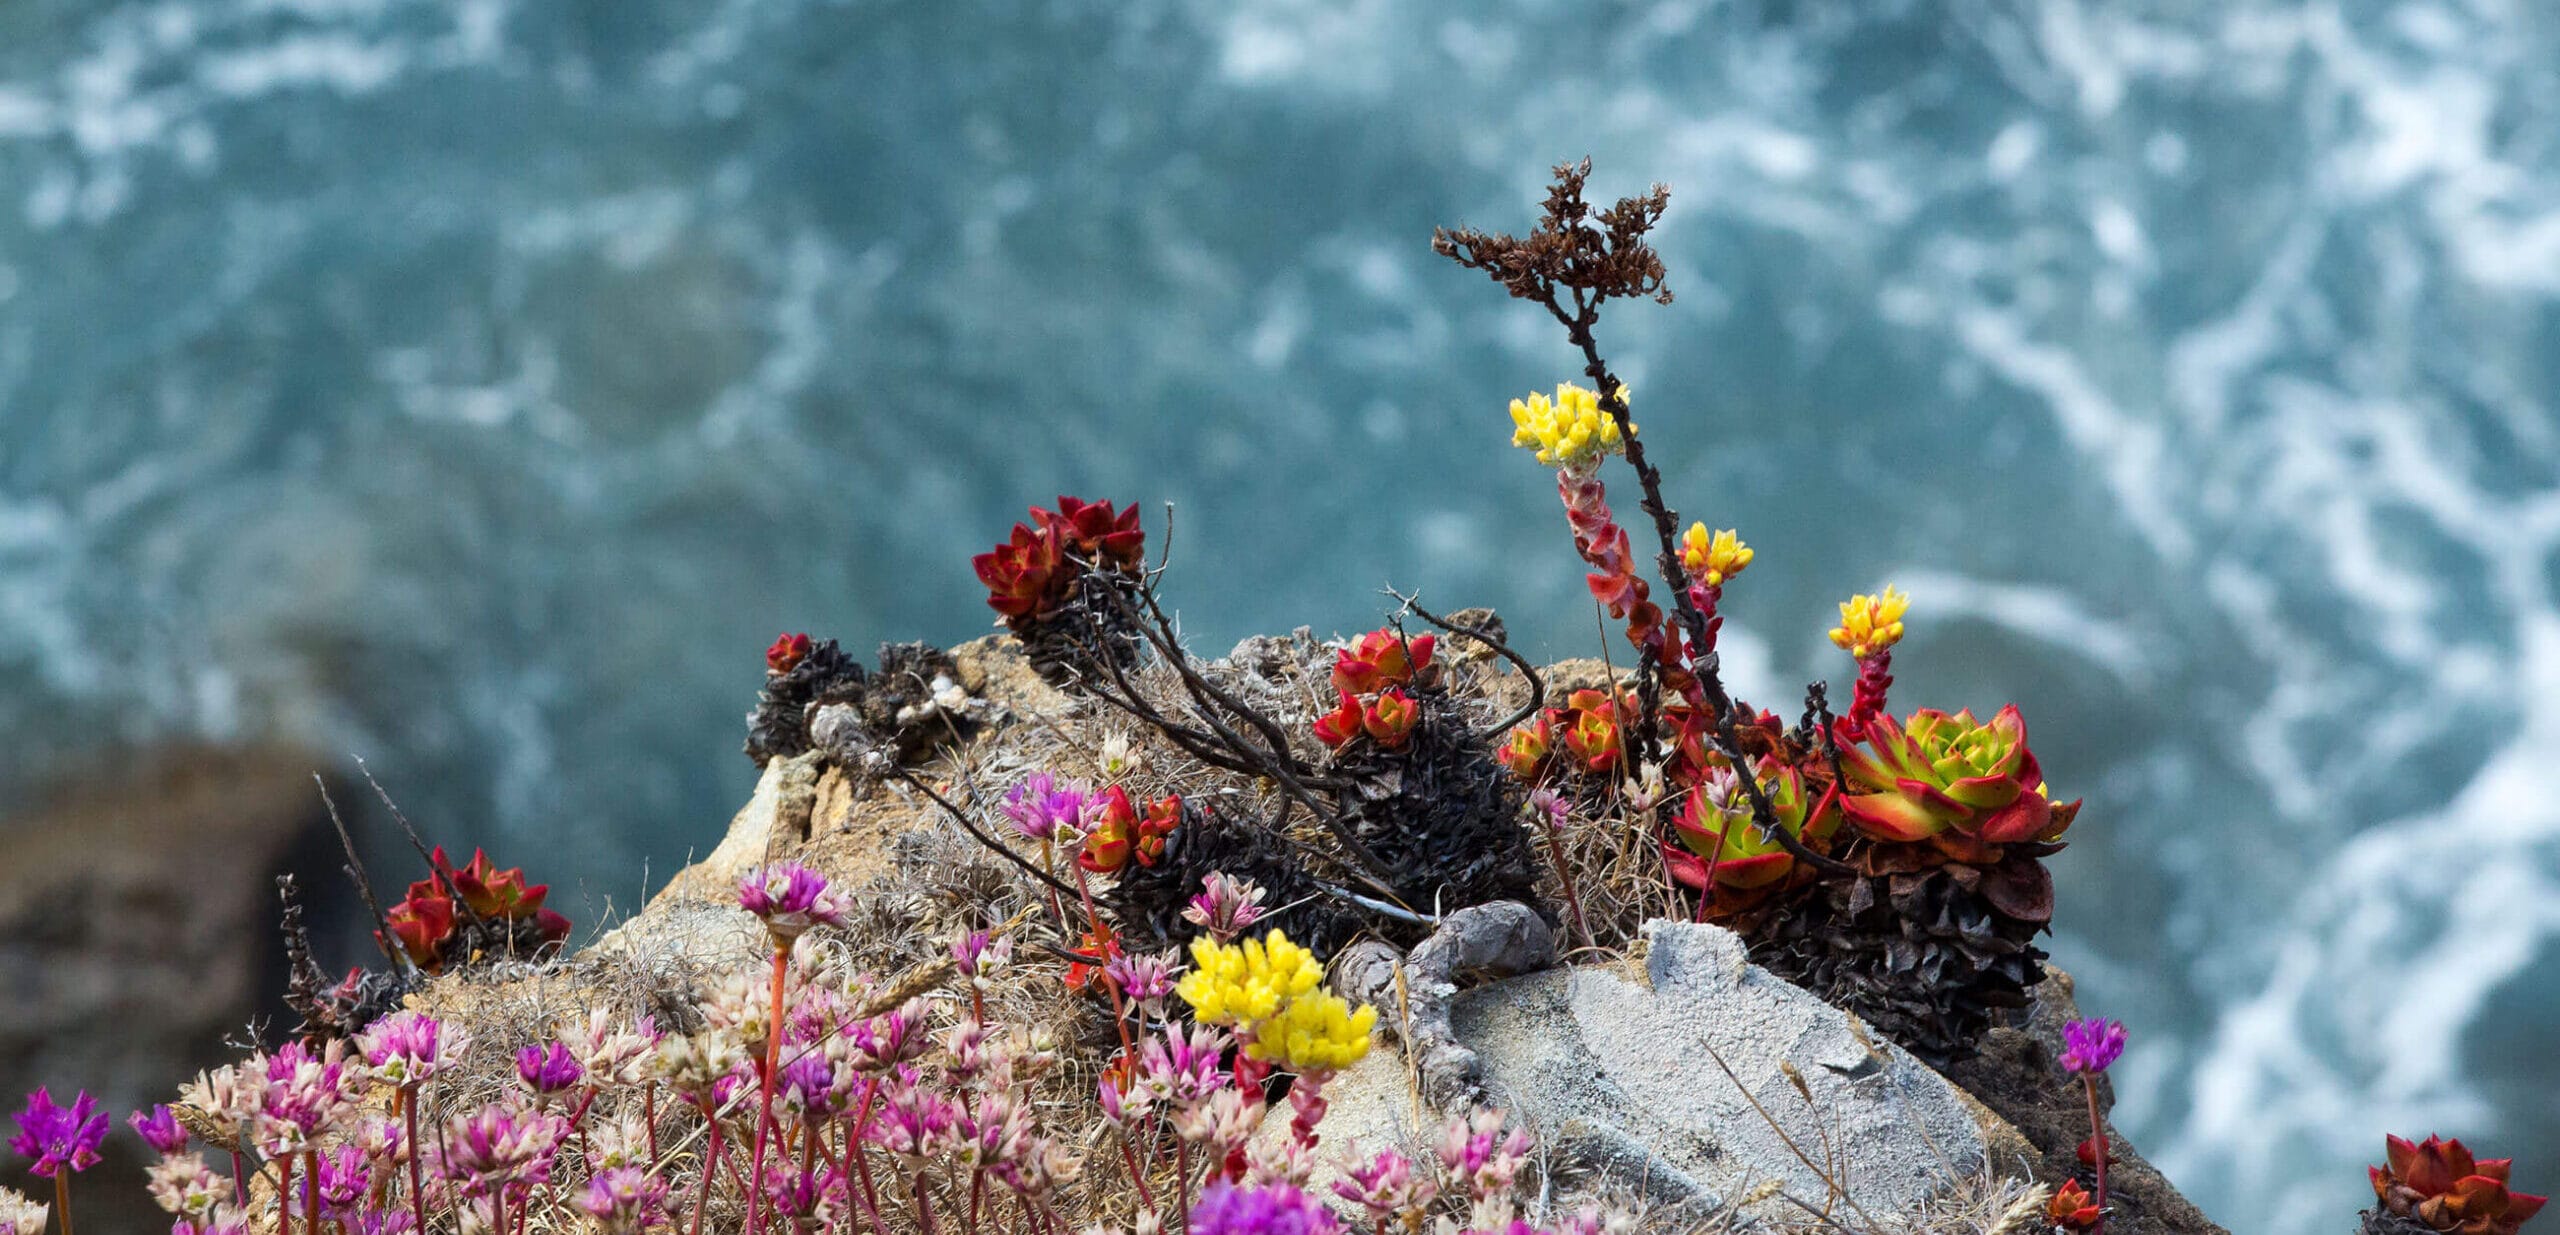 Colorful flowers growing on a rock near the ocean.